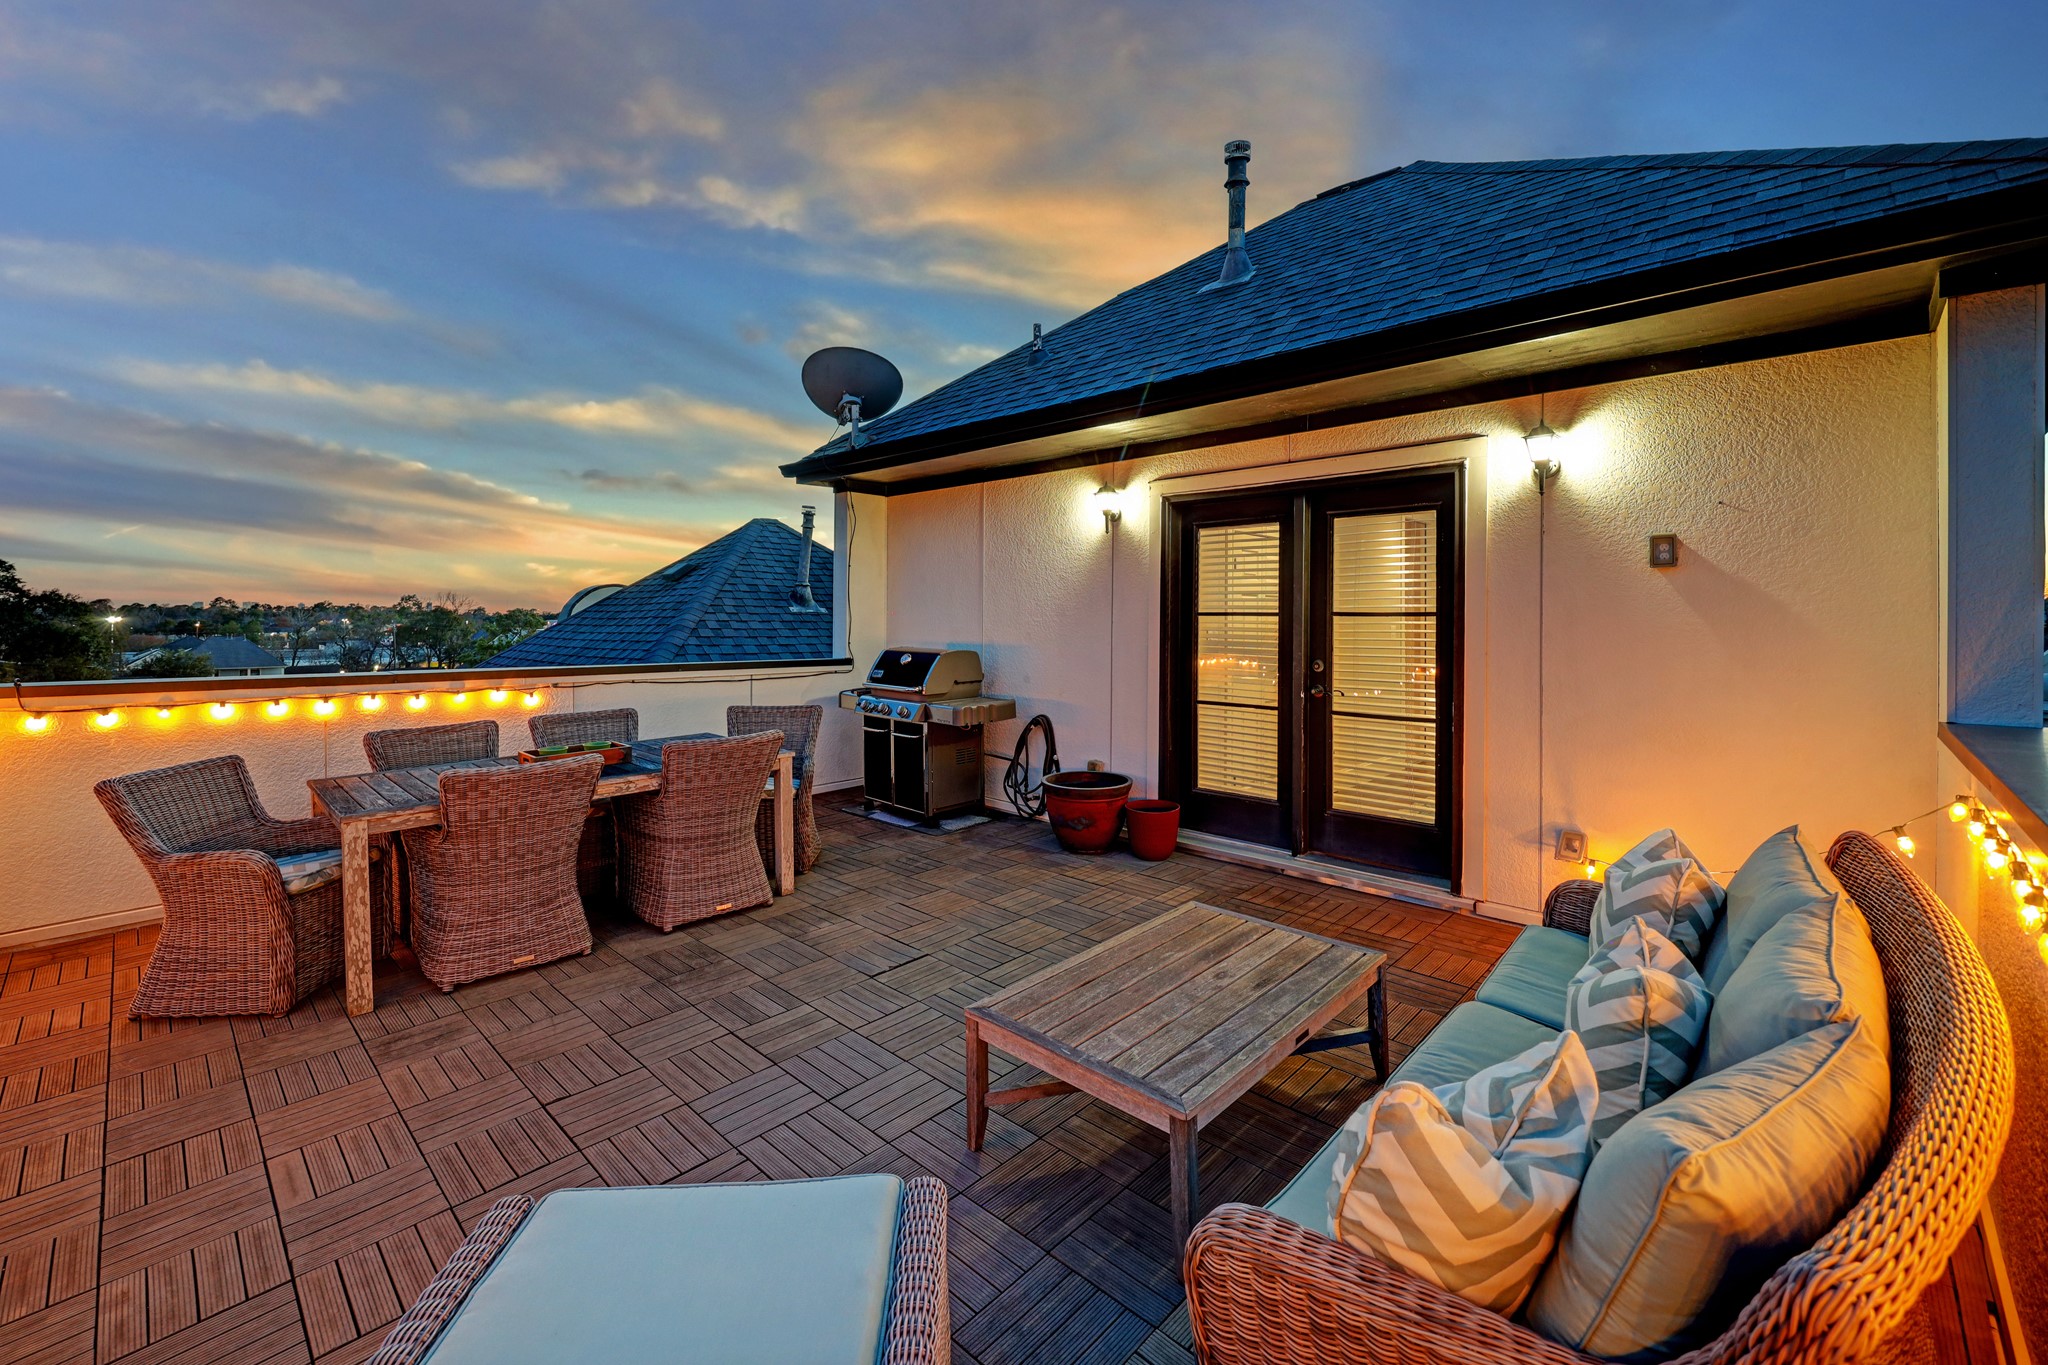 This deck is very private and spacious, which makes it one of the best roof top decks in the area!